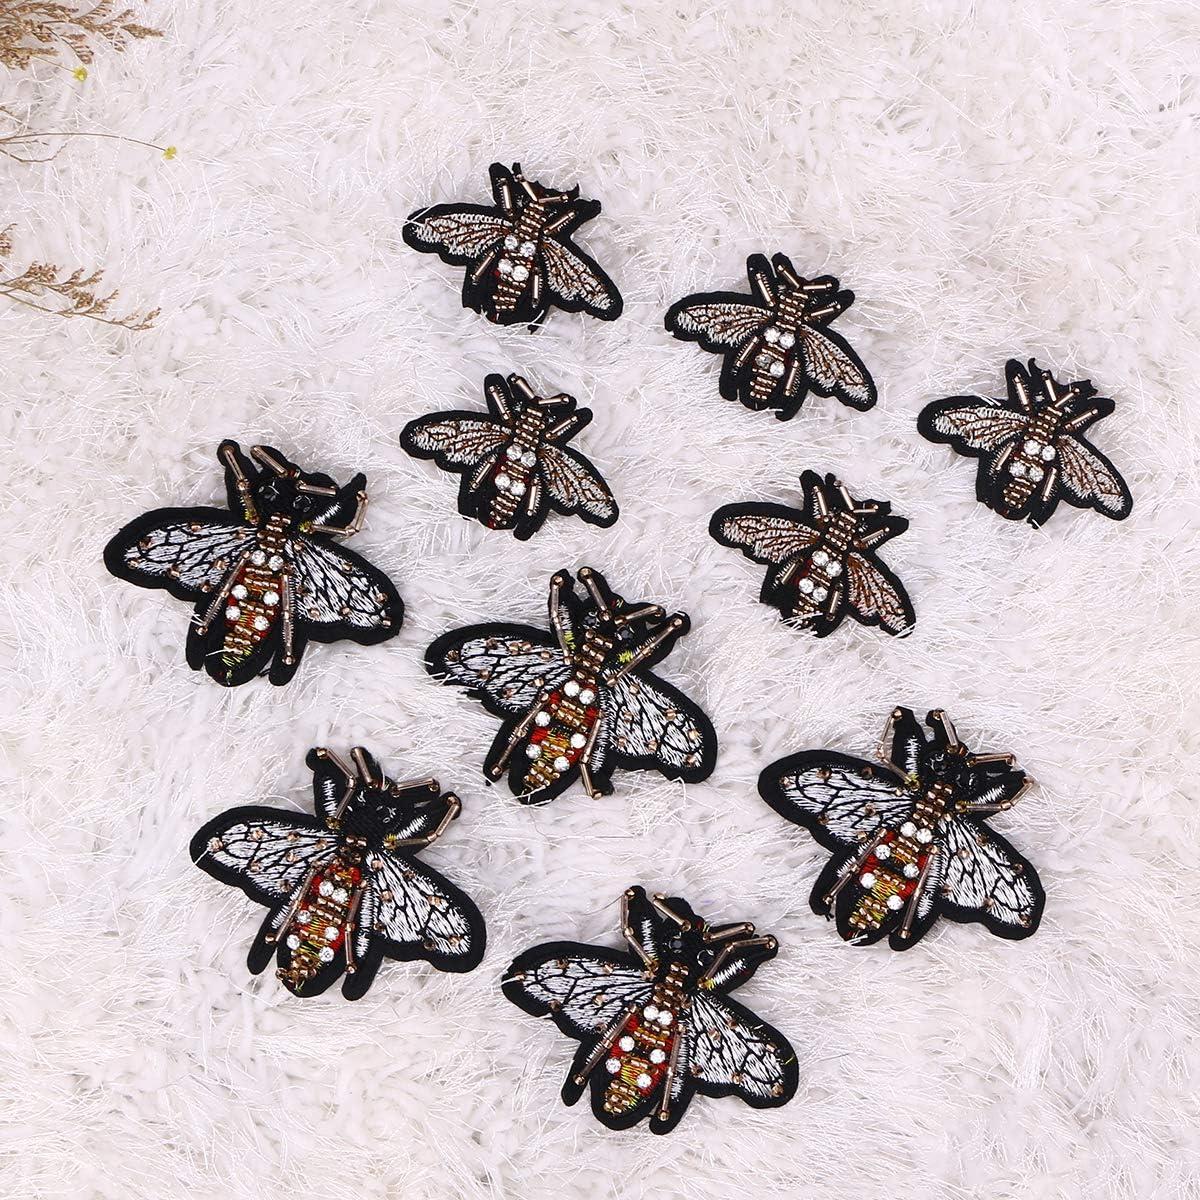 4 X Small Bee Clothing Patches, Bee Iron on Patches, Bee Fabric